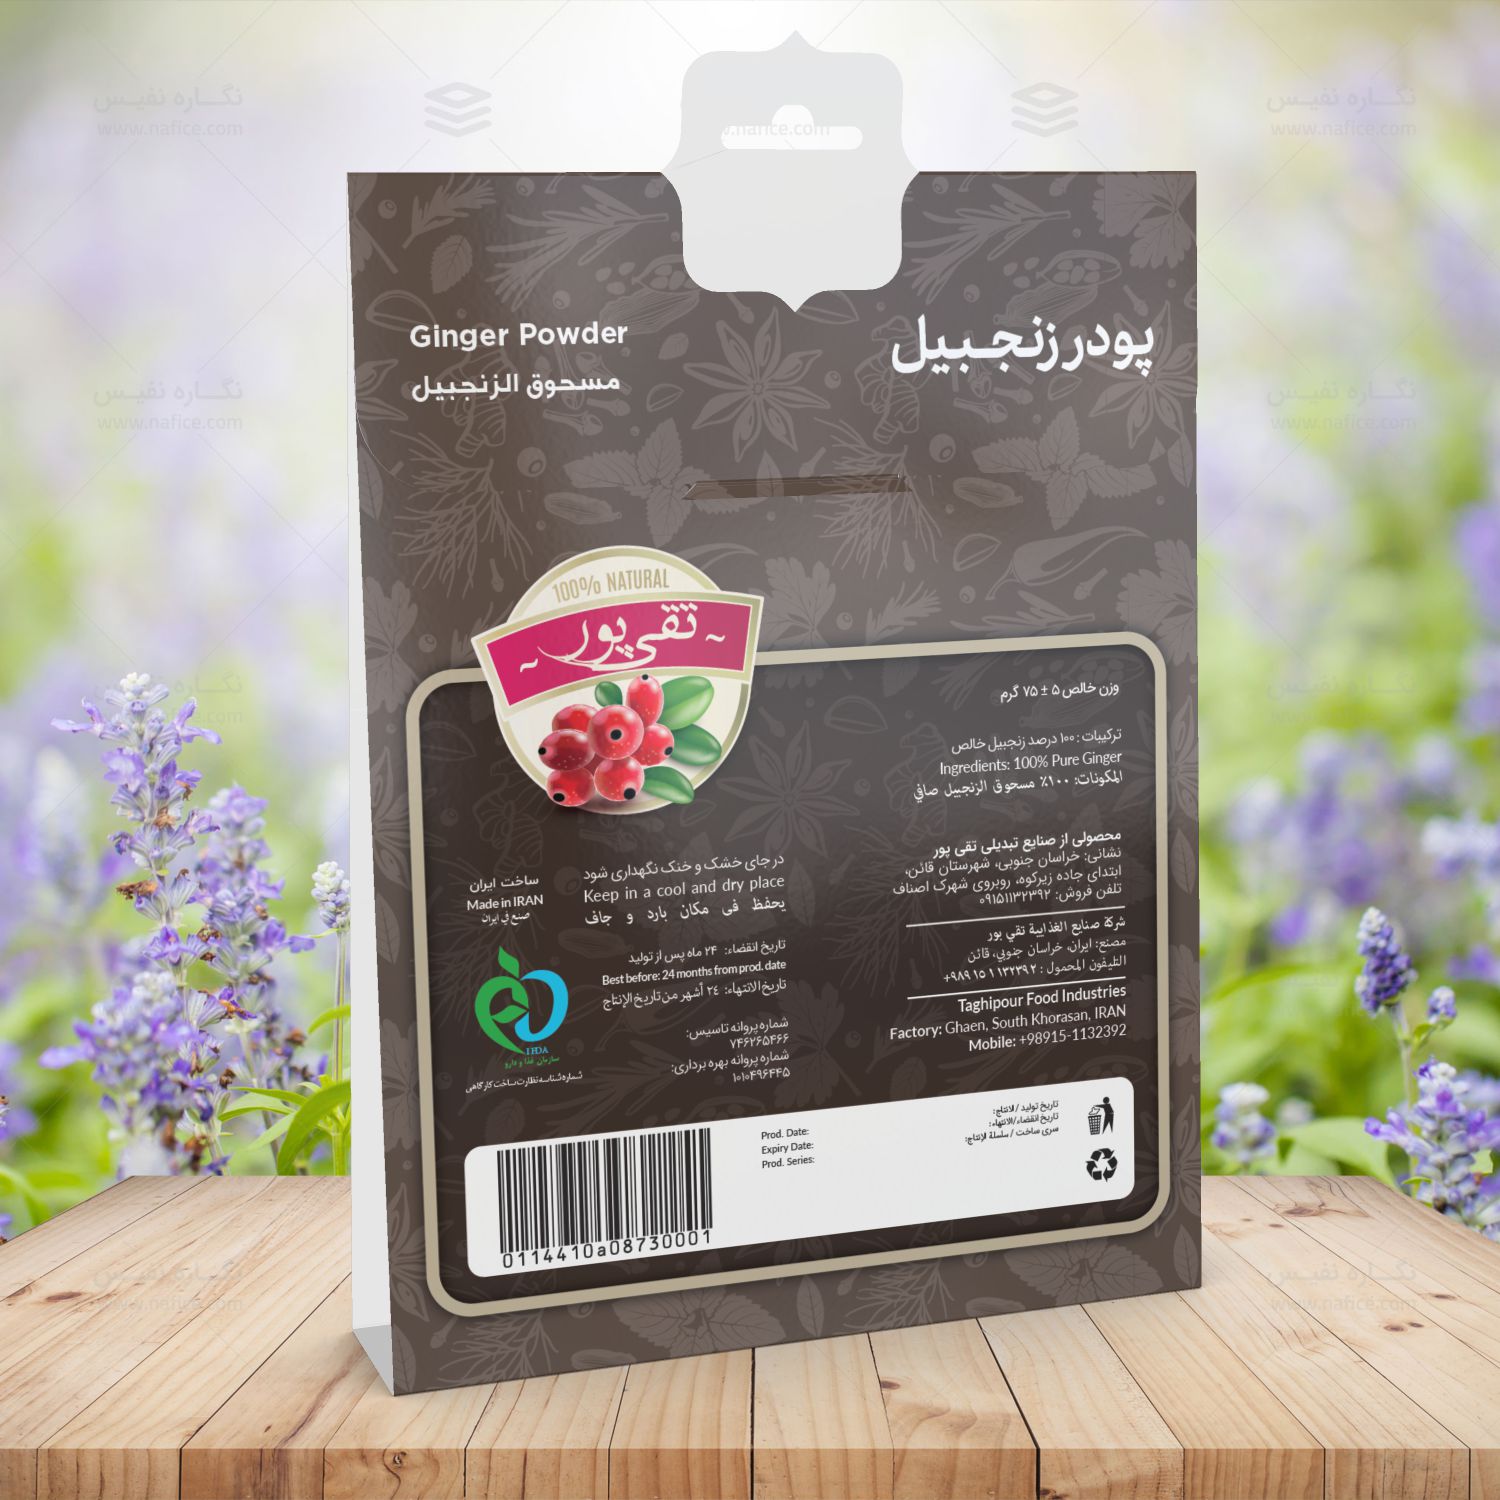 2022 02 16 Taghipour Ginger 75G2 آویز ادویه – پاکت زنجبیل